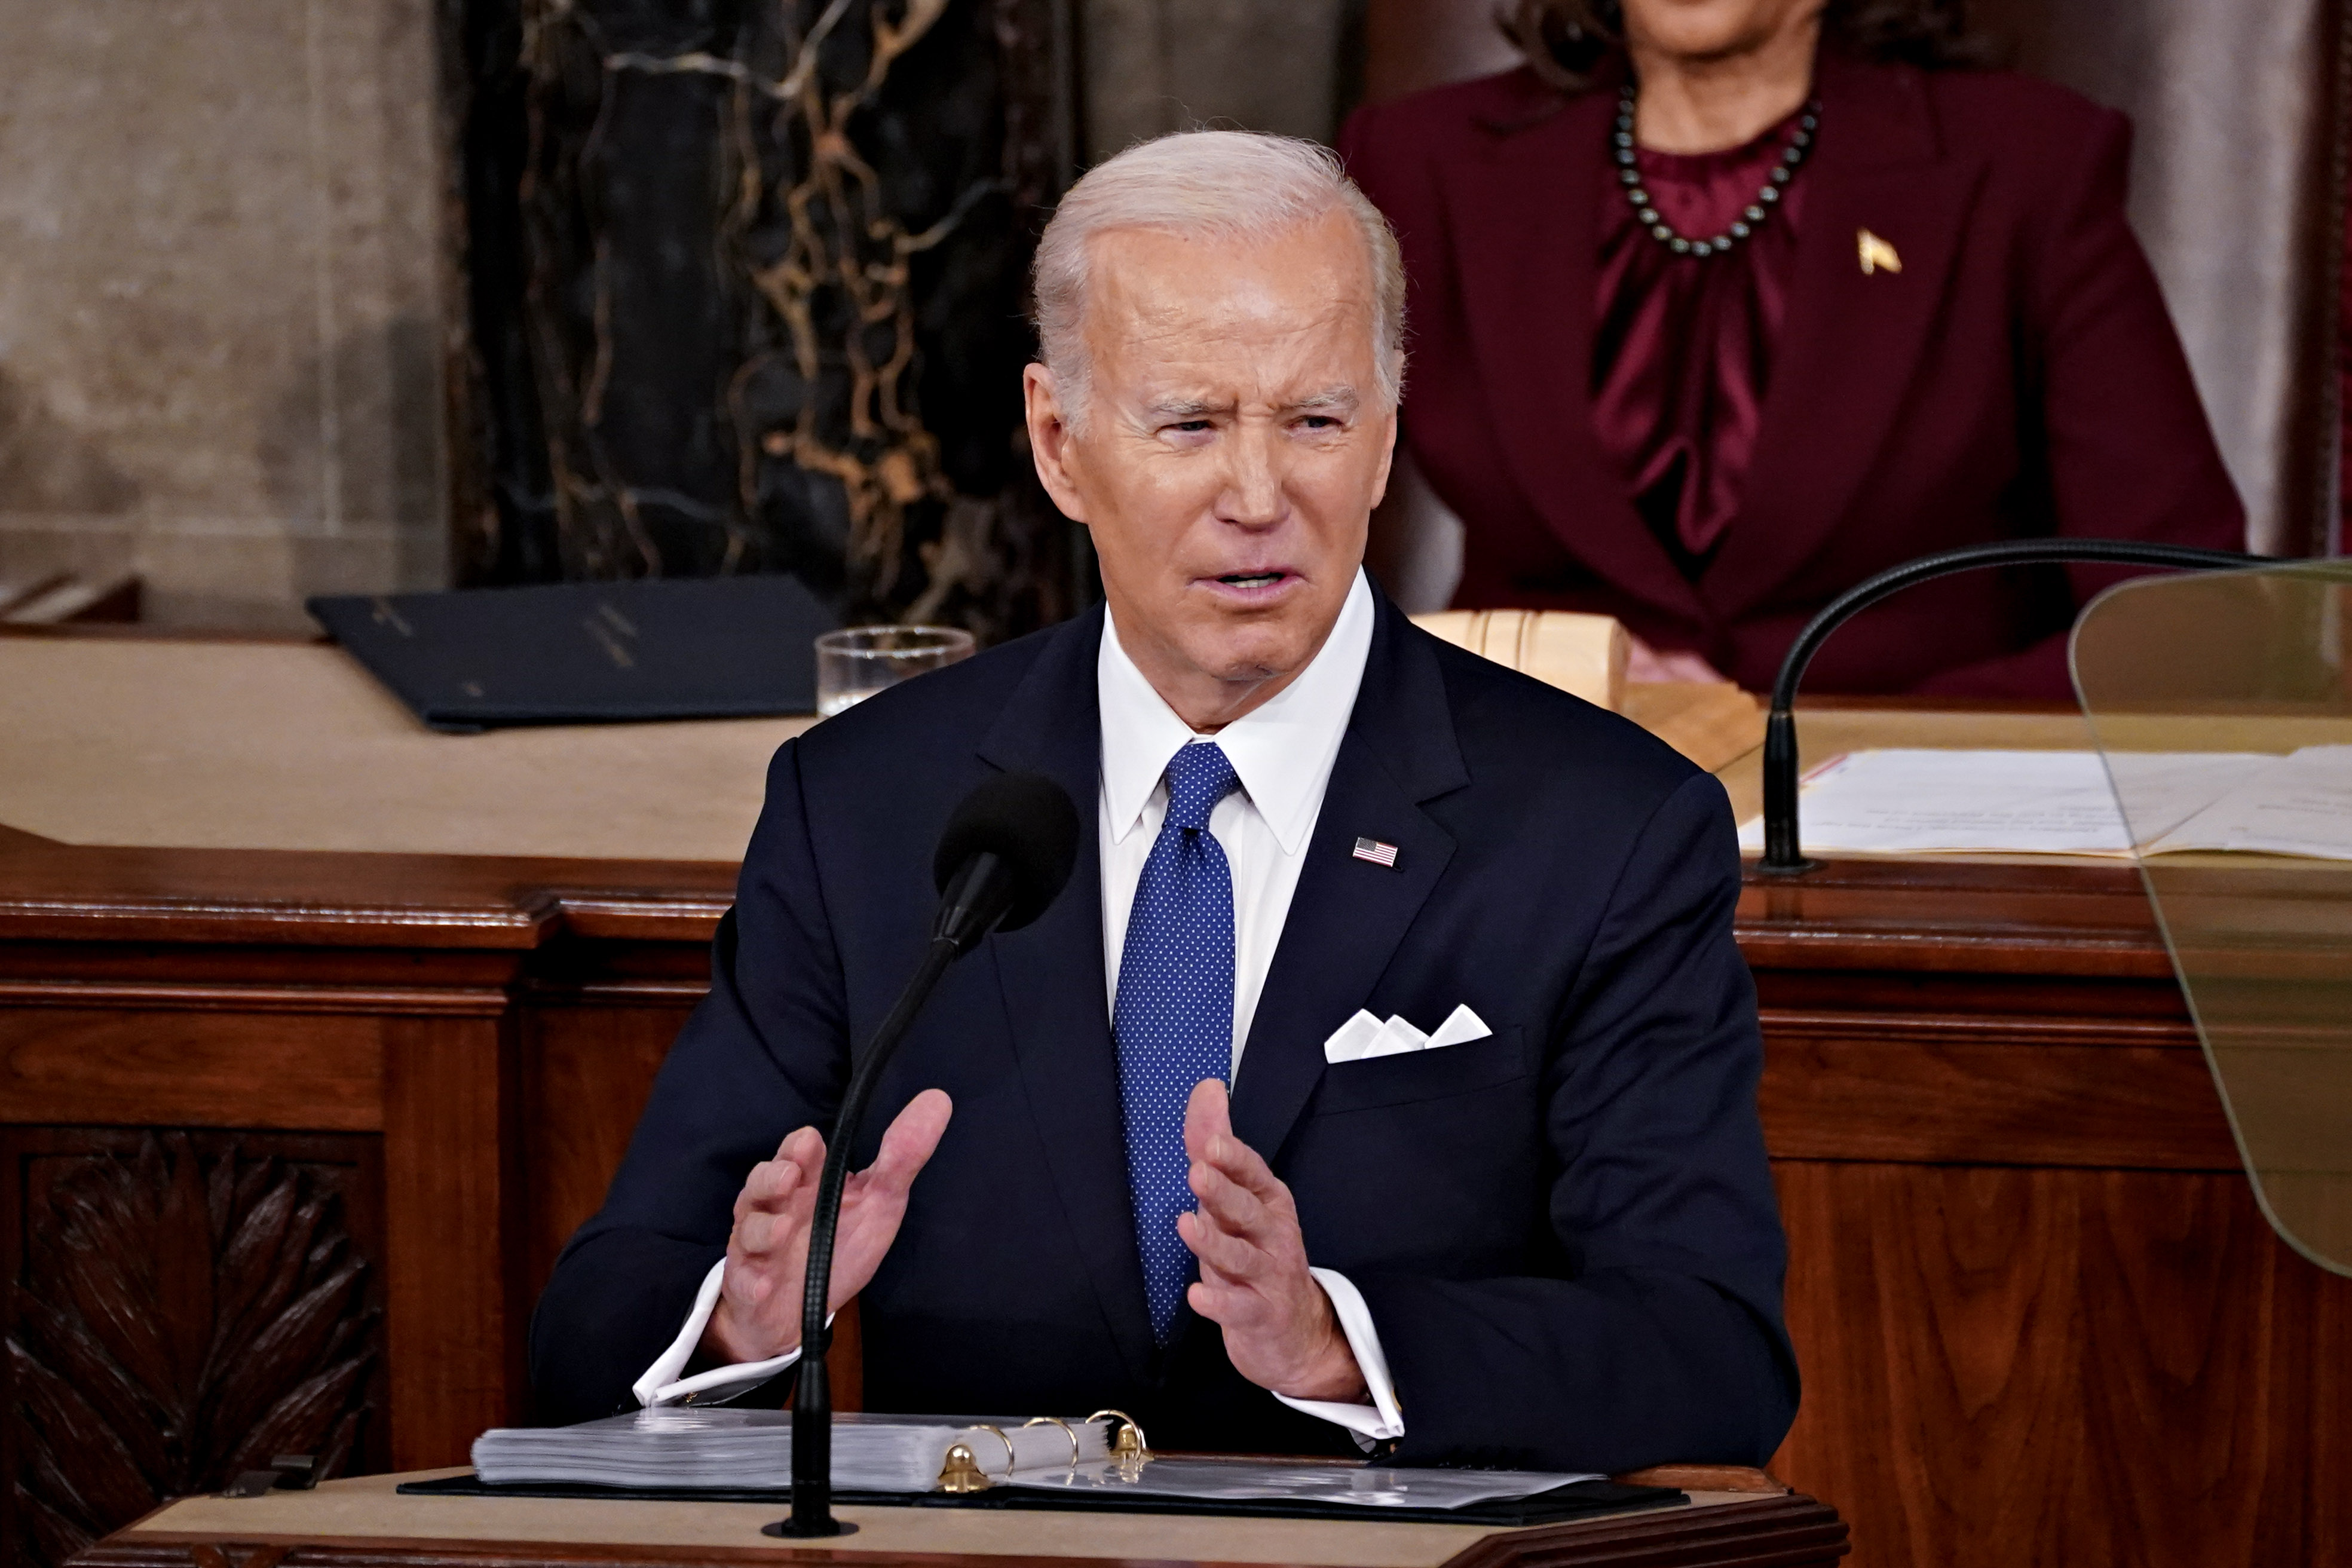 US President Joe Biden speaks during a State of the Union address at the US Capitol in Washington, DC, US, on Tuesday, Feb. 7, 2023. 